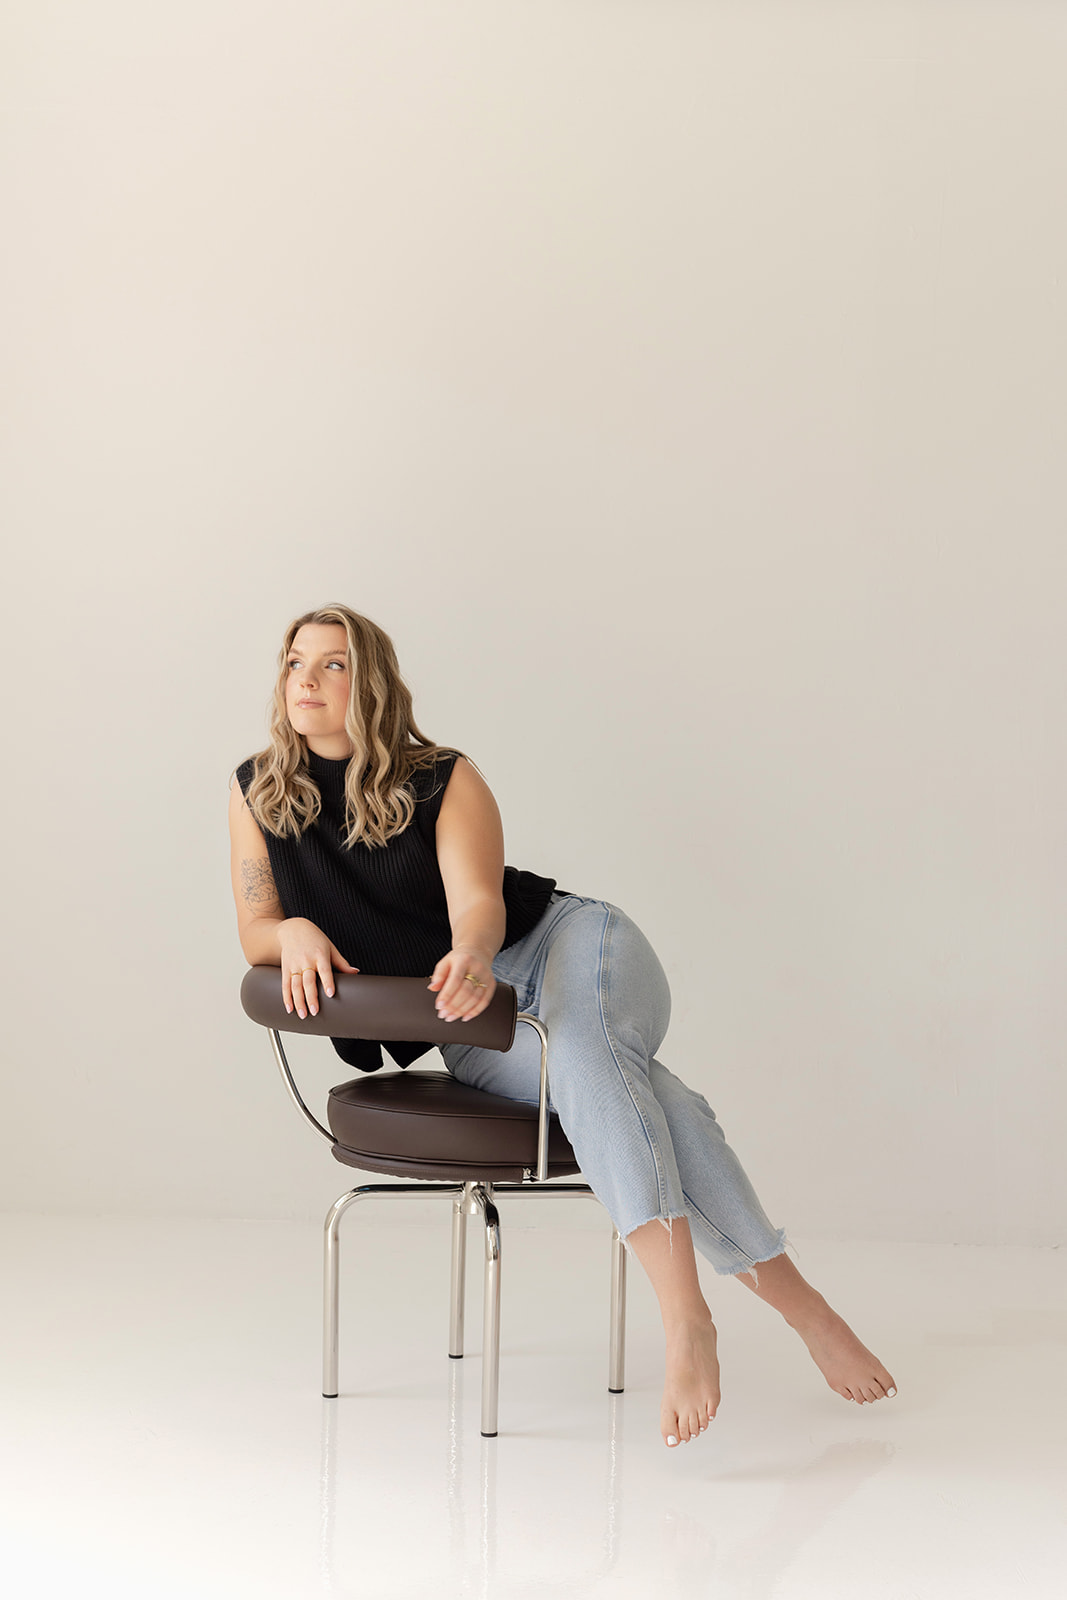 Reveal Studio Co. sharing her best advice for your first year in business